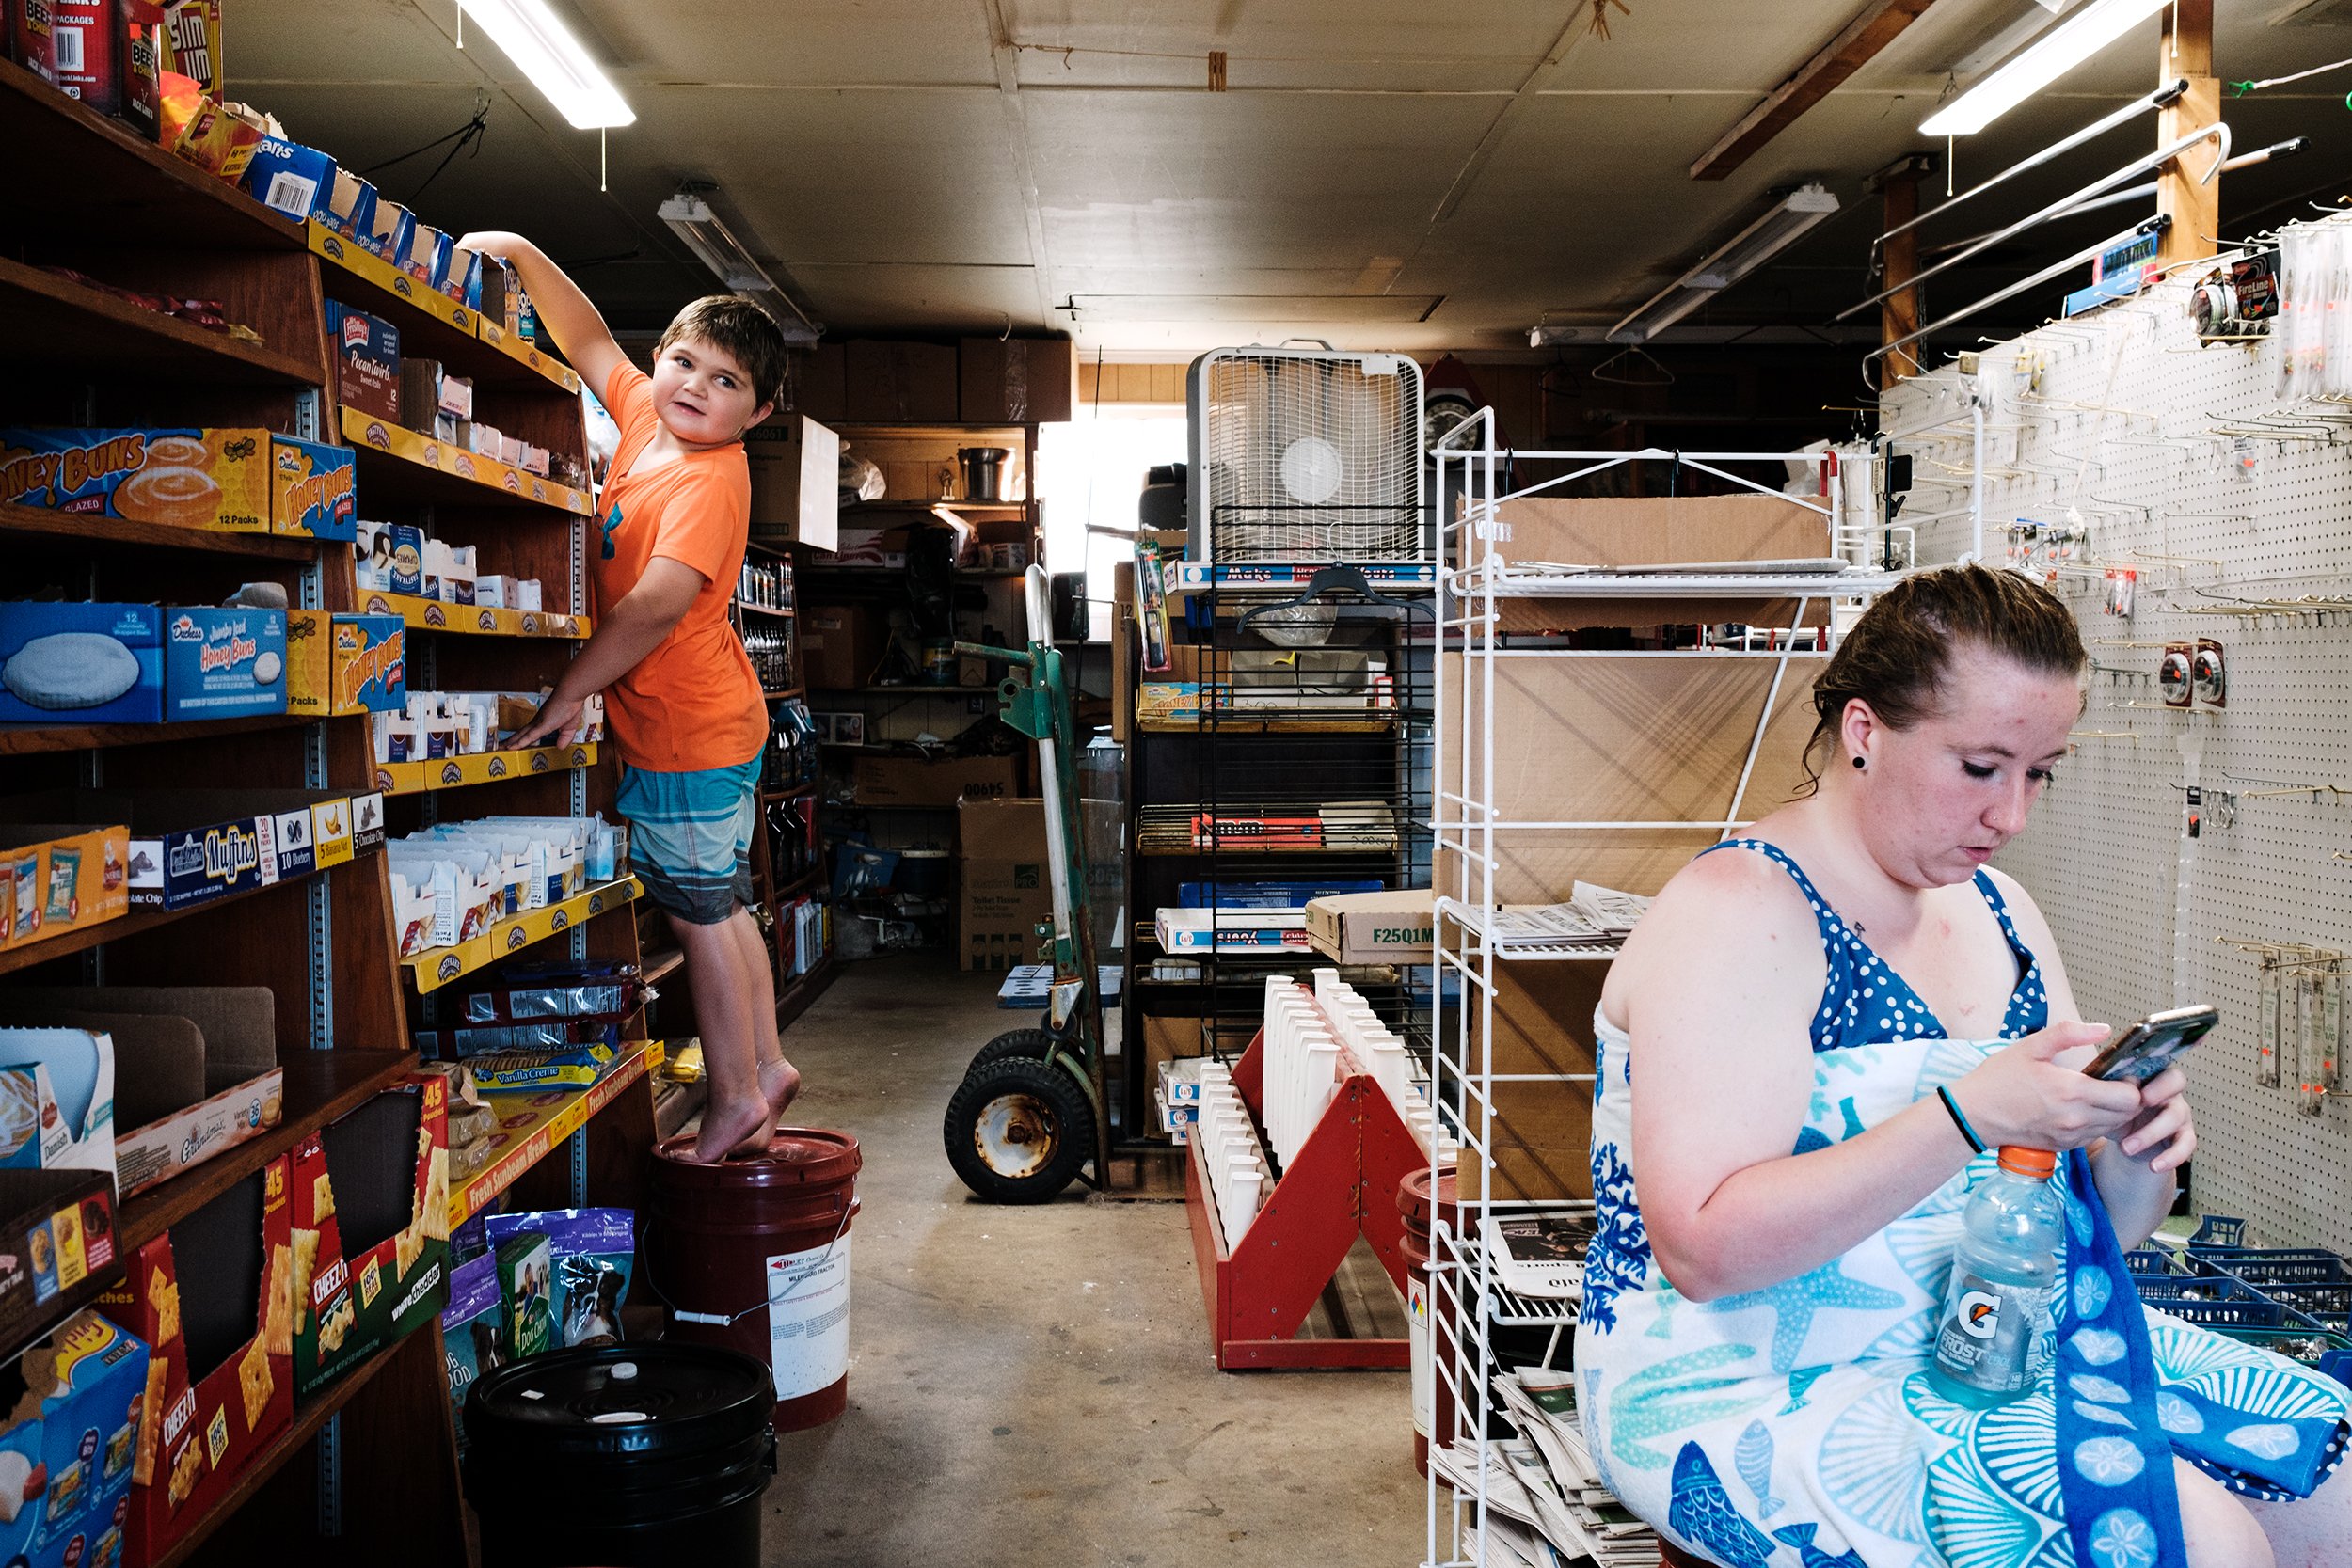  Luke Holloway, 6, reaches for Pop-Tarts at Arby’s General Store in Deal lsland, while Kelsie Holland checks her phone. The bait and tackle rack has been empty since Covid-19, due to a lack of tourism.  